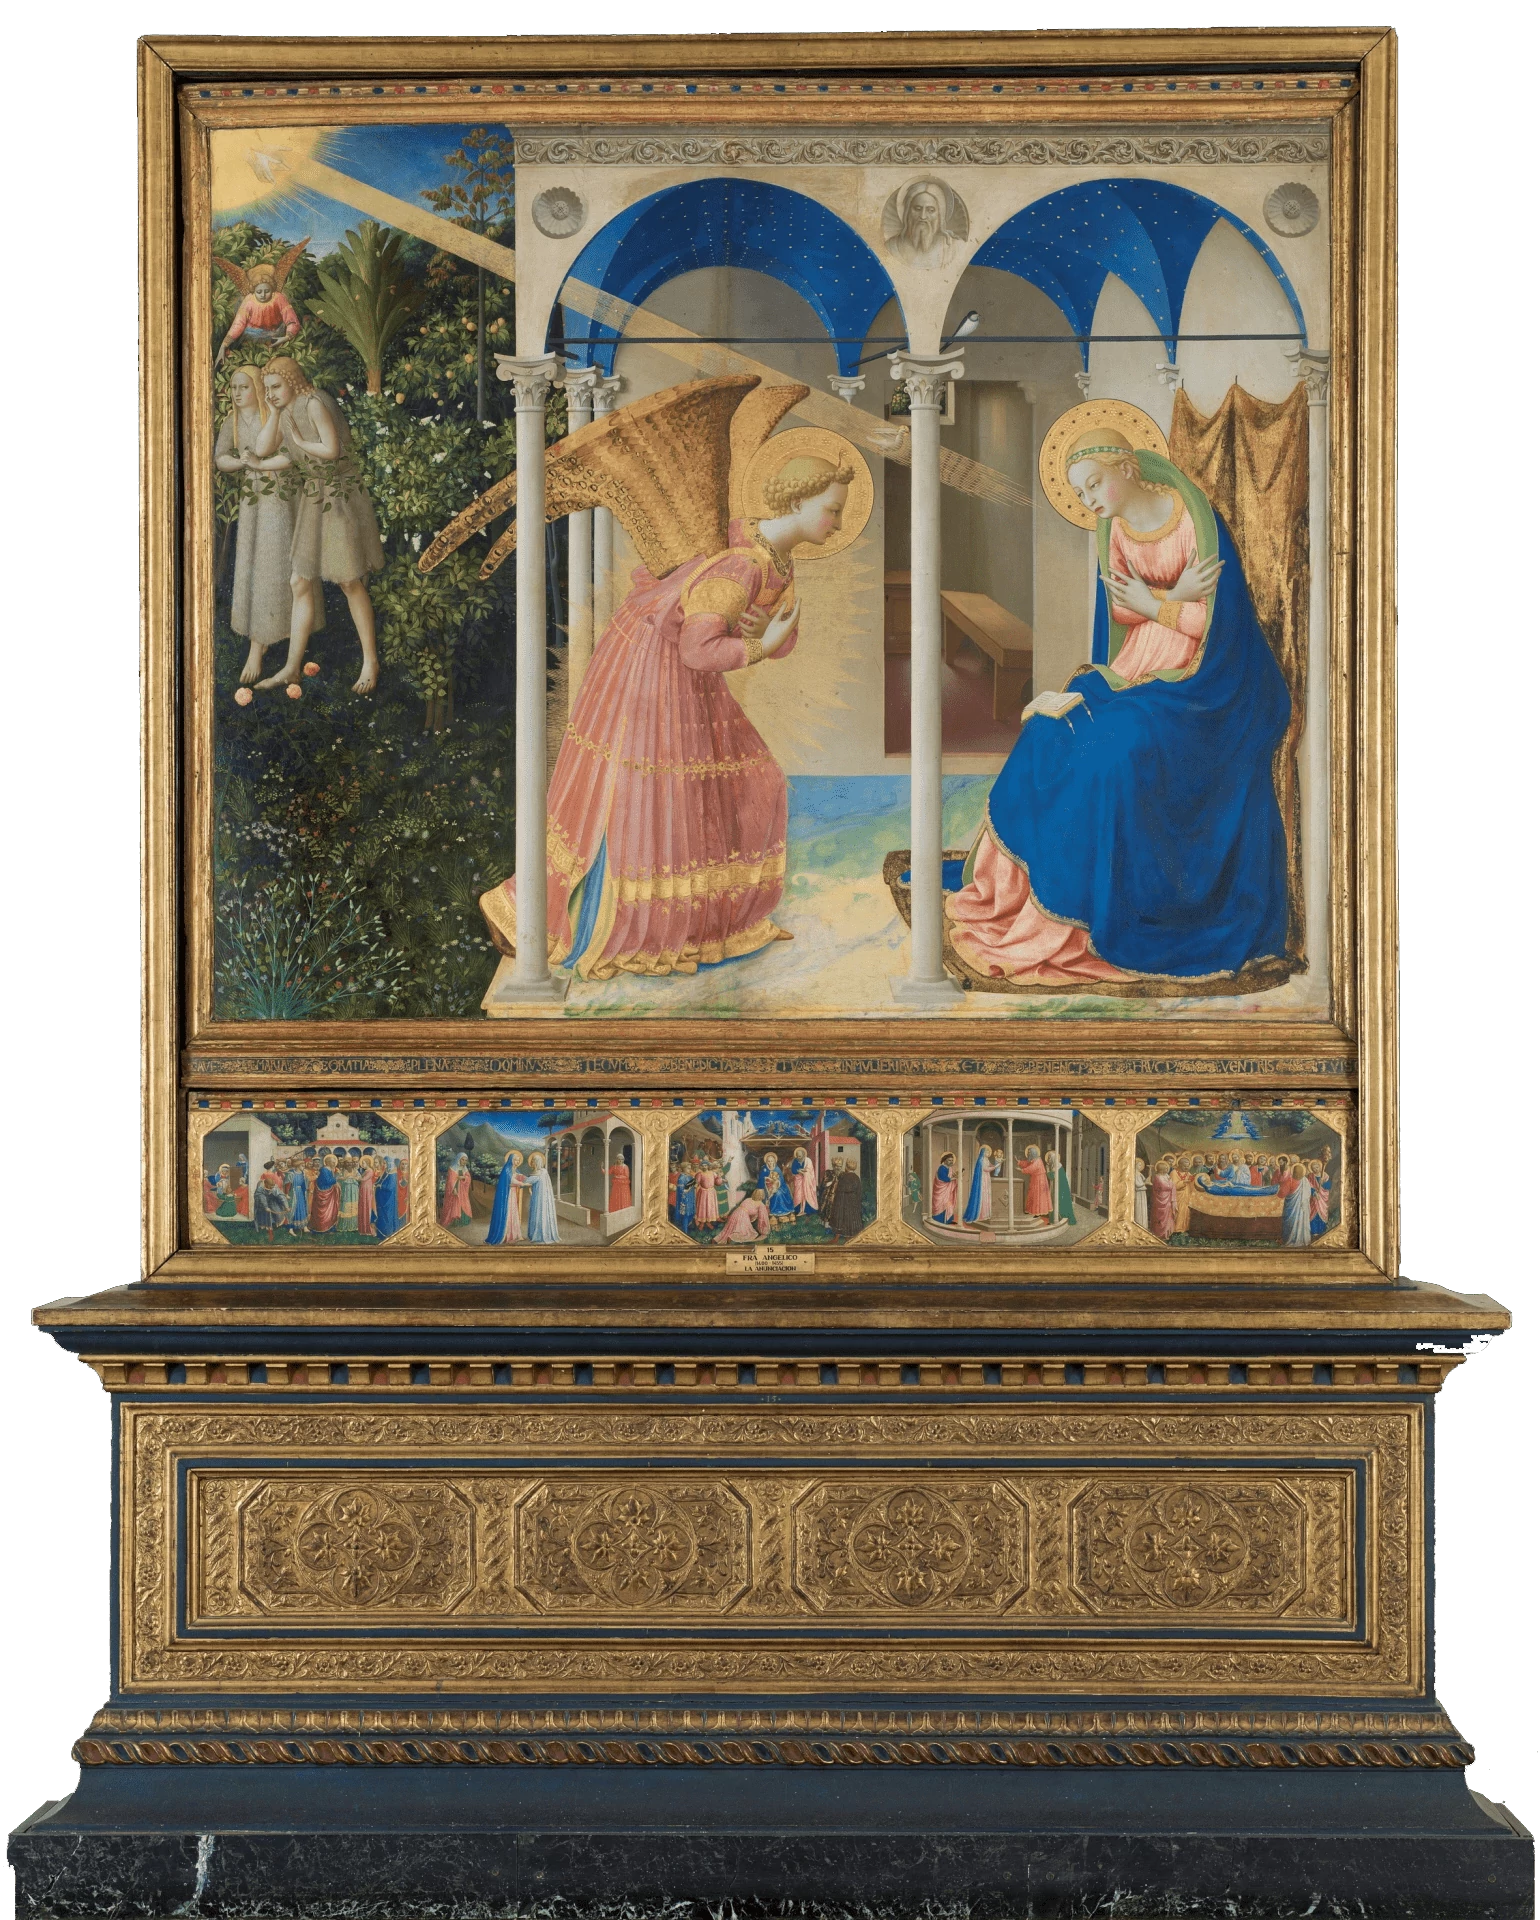 The Annunciation and Life of the Virgin, Fra Angelico